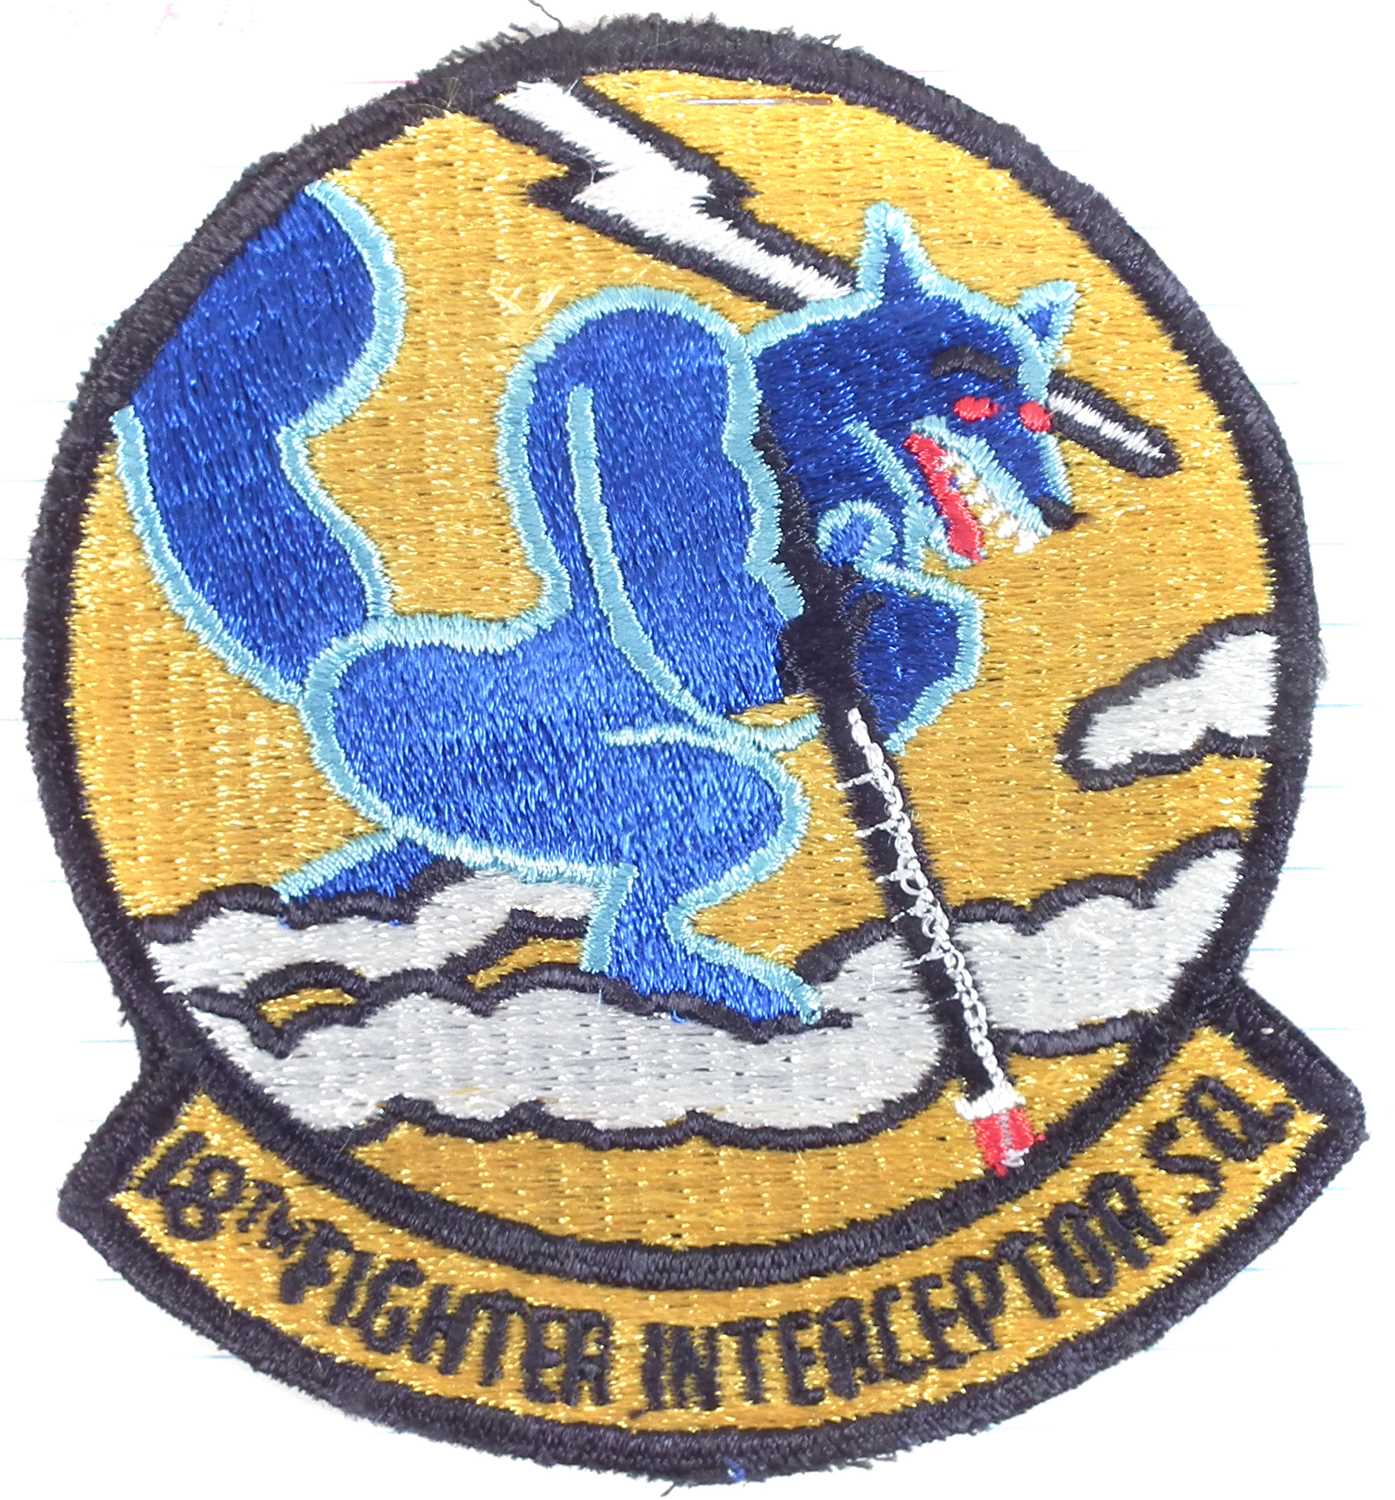 Large collection of American Airforce / Air Defence patches